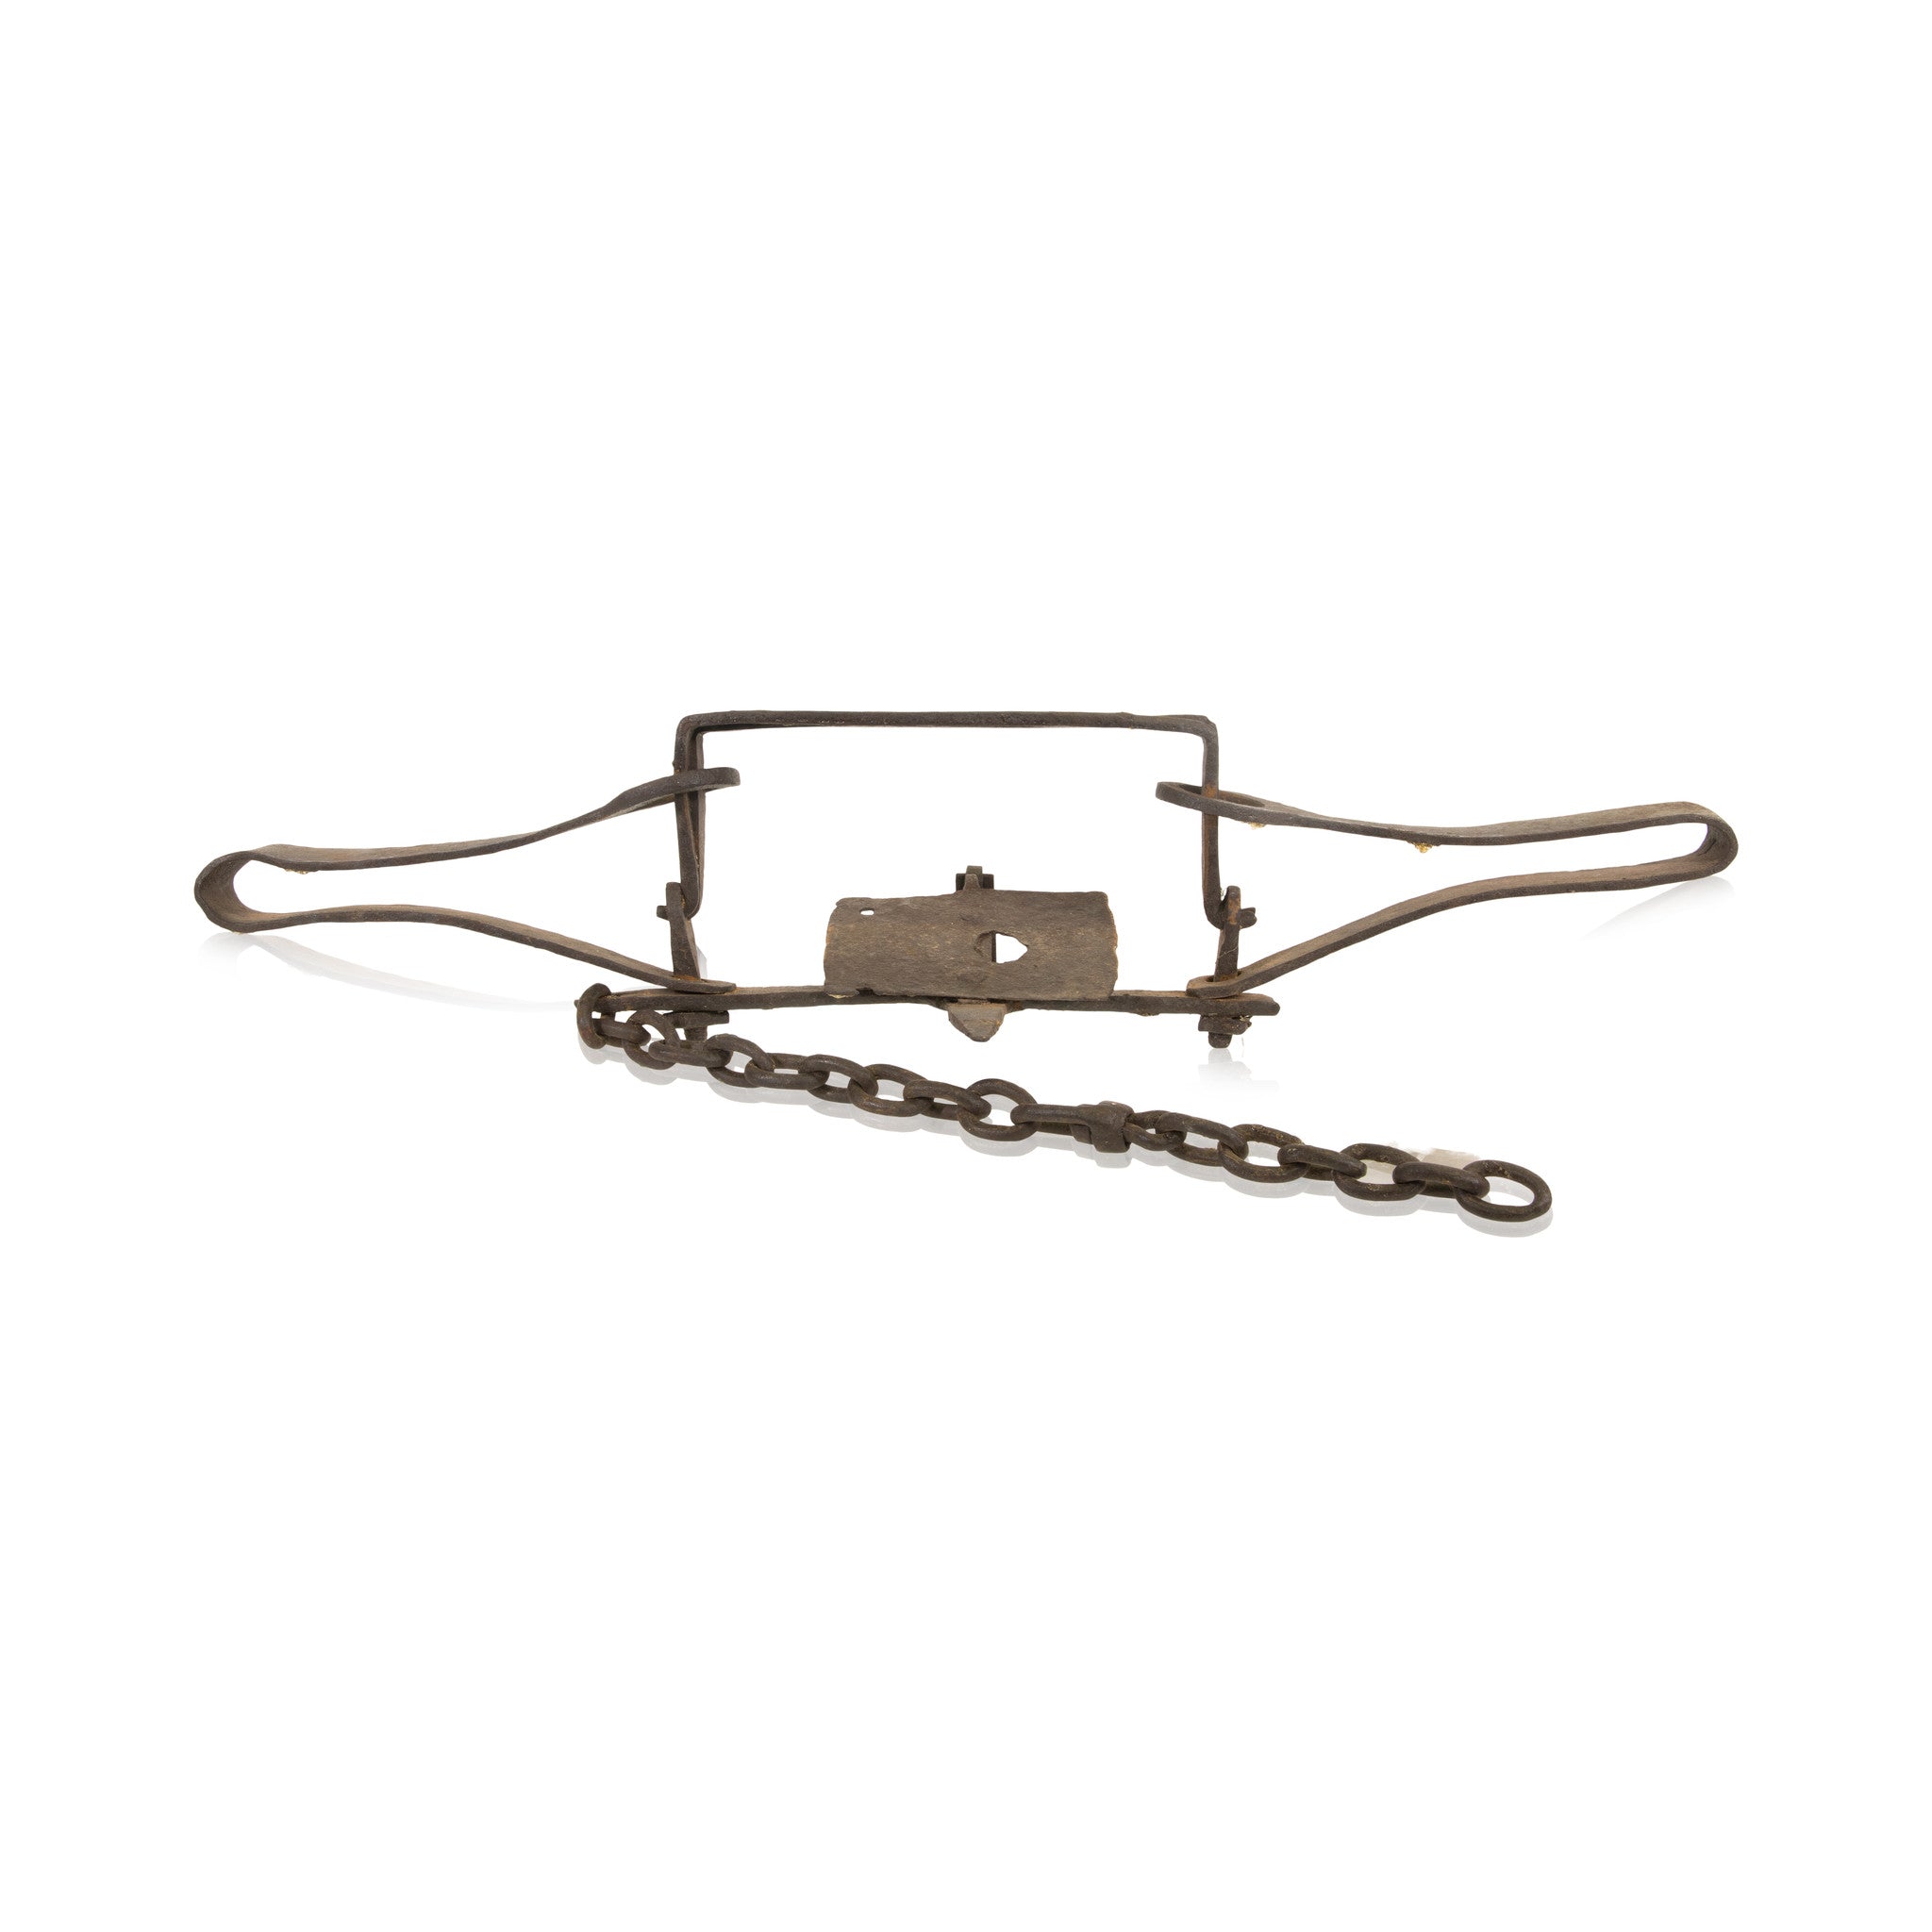 Hand Forged Double Spring Trap, Western, Fur Trade, Trap